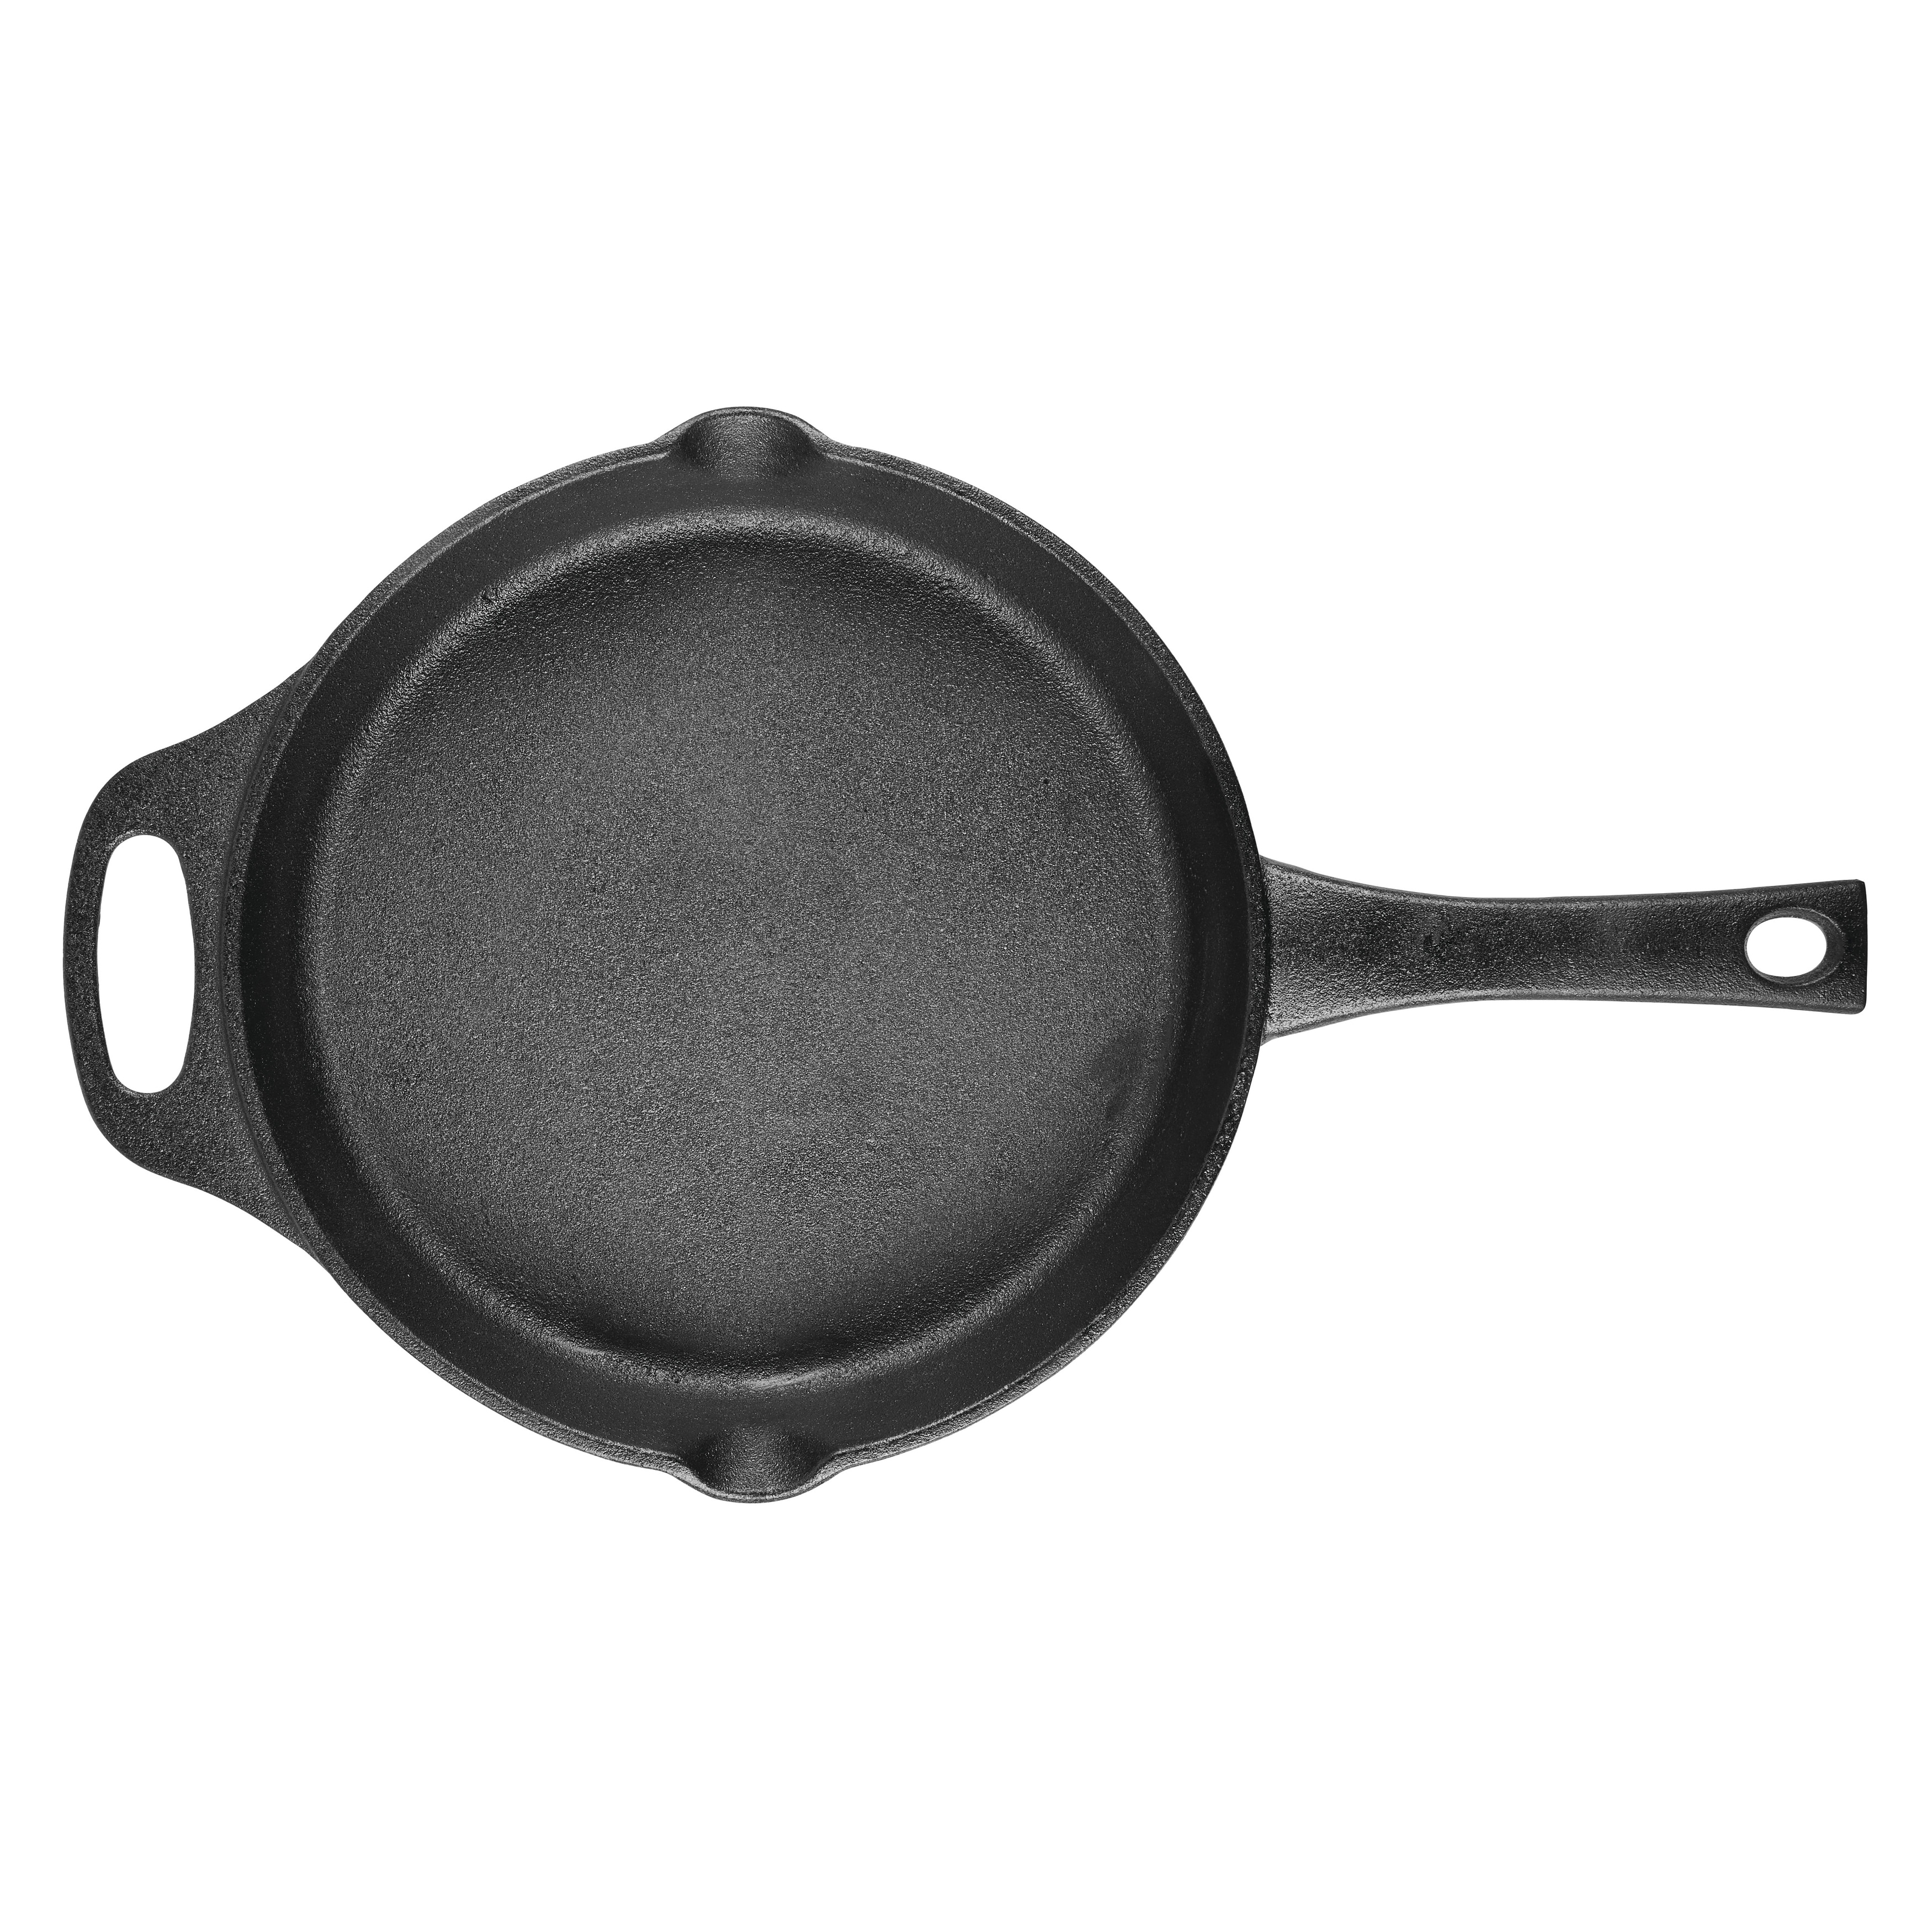 https://ak1.ostkcdn.com/images/products/is/images/direct/c6323a2b1390a393b09ebee50cd9d5c553261322/Rachael-Ray-Cast-Iron-Pre-seasoned-Skillet%2C-10in.jpg